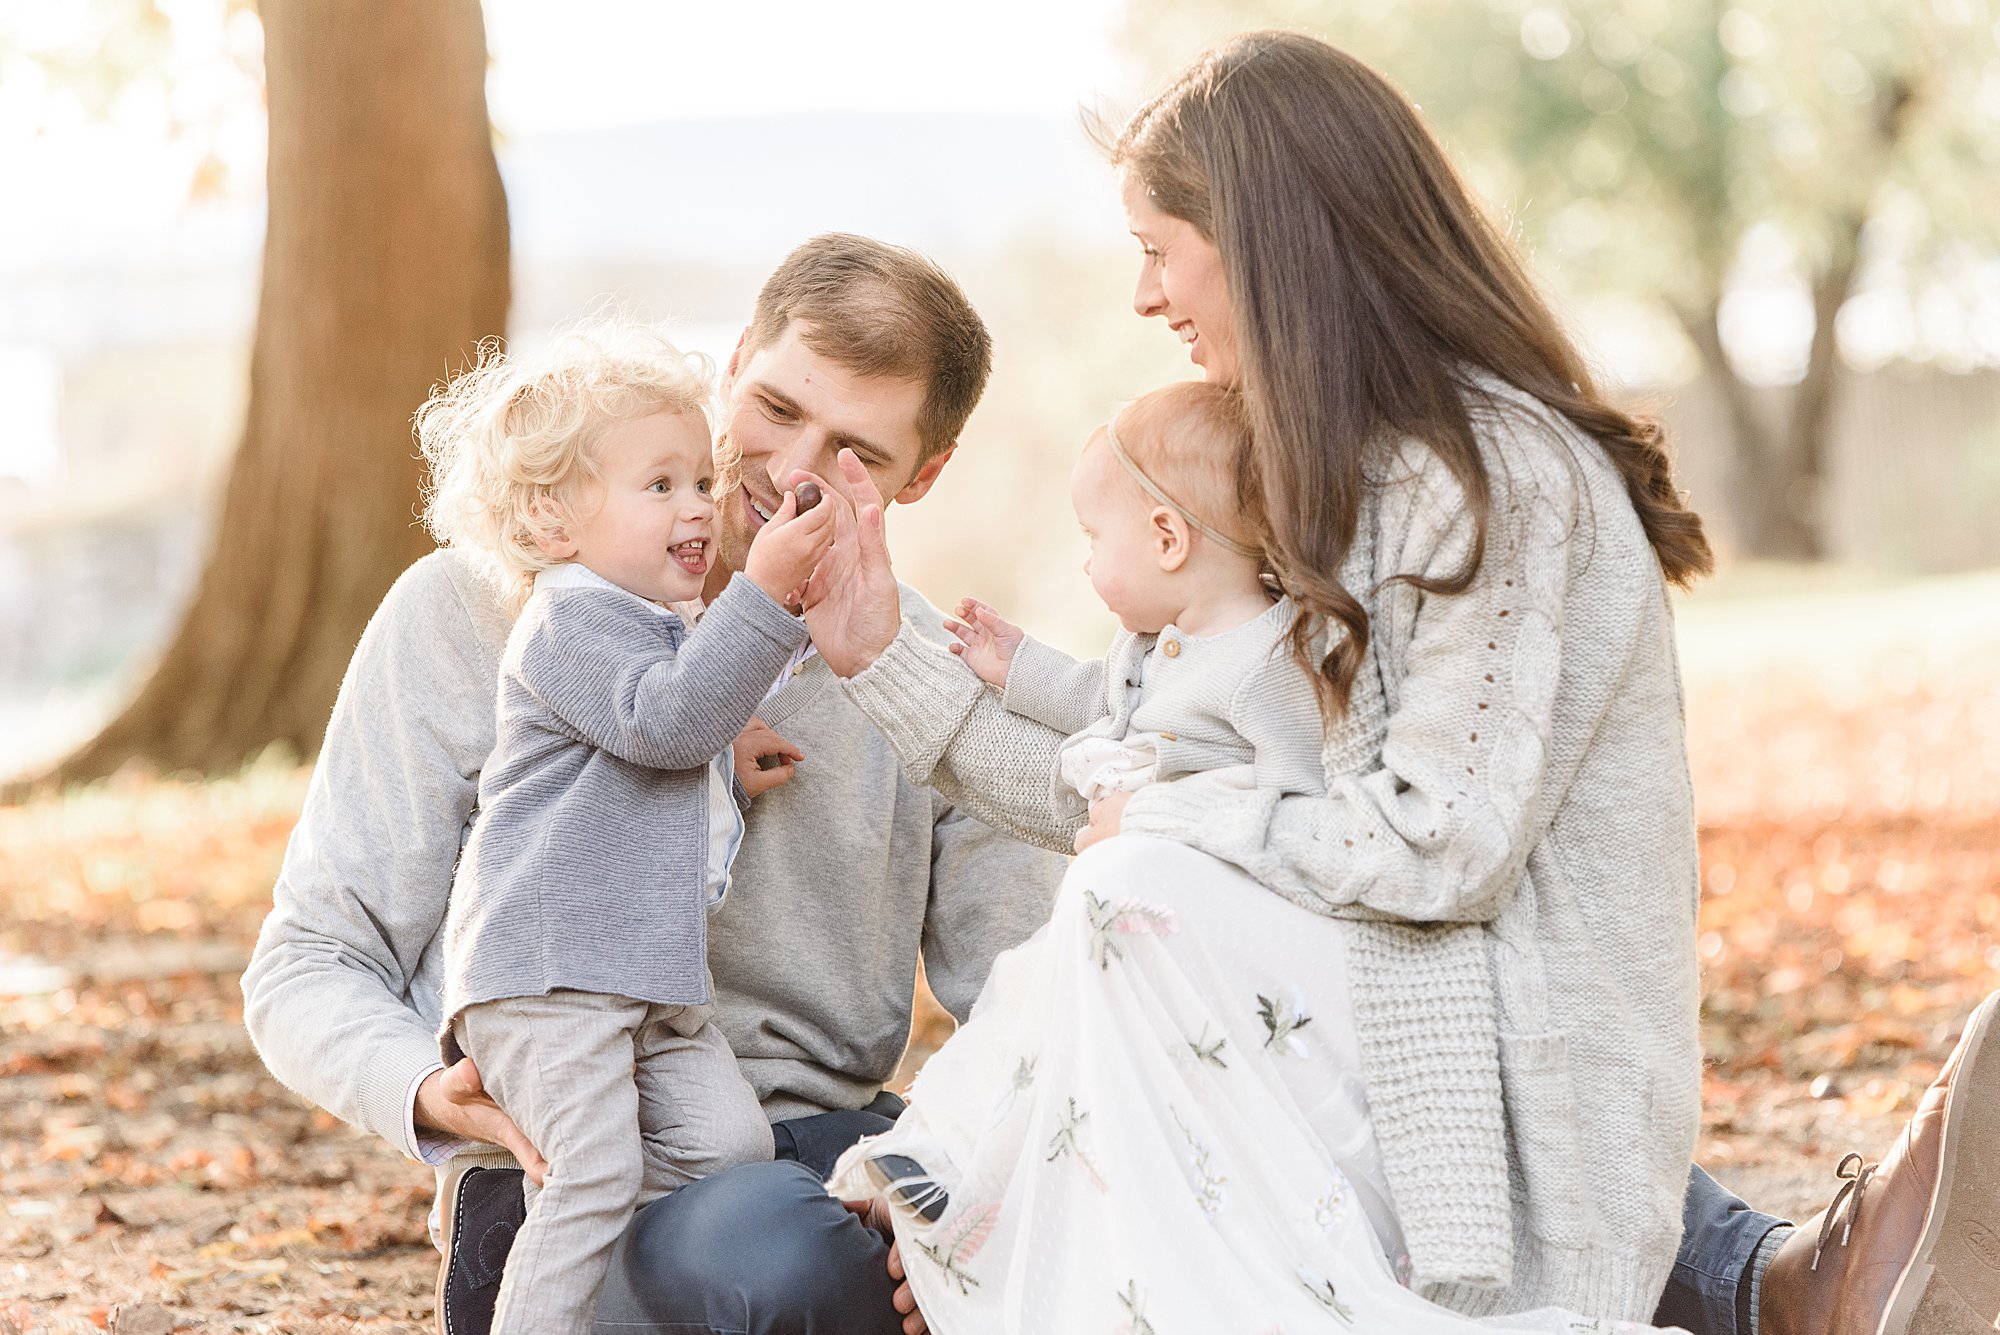 How to find the best family photographer